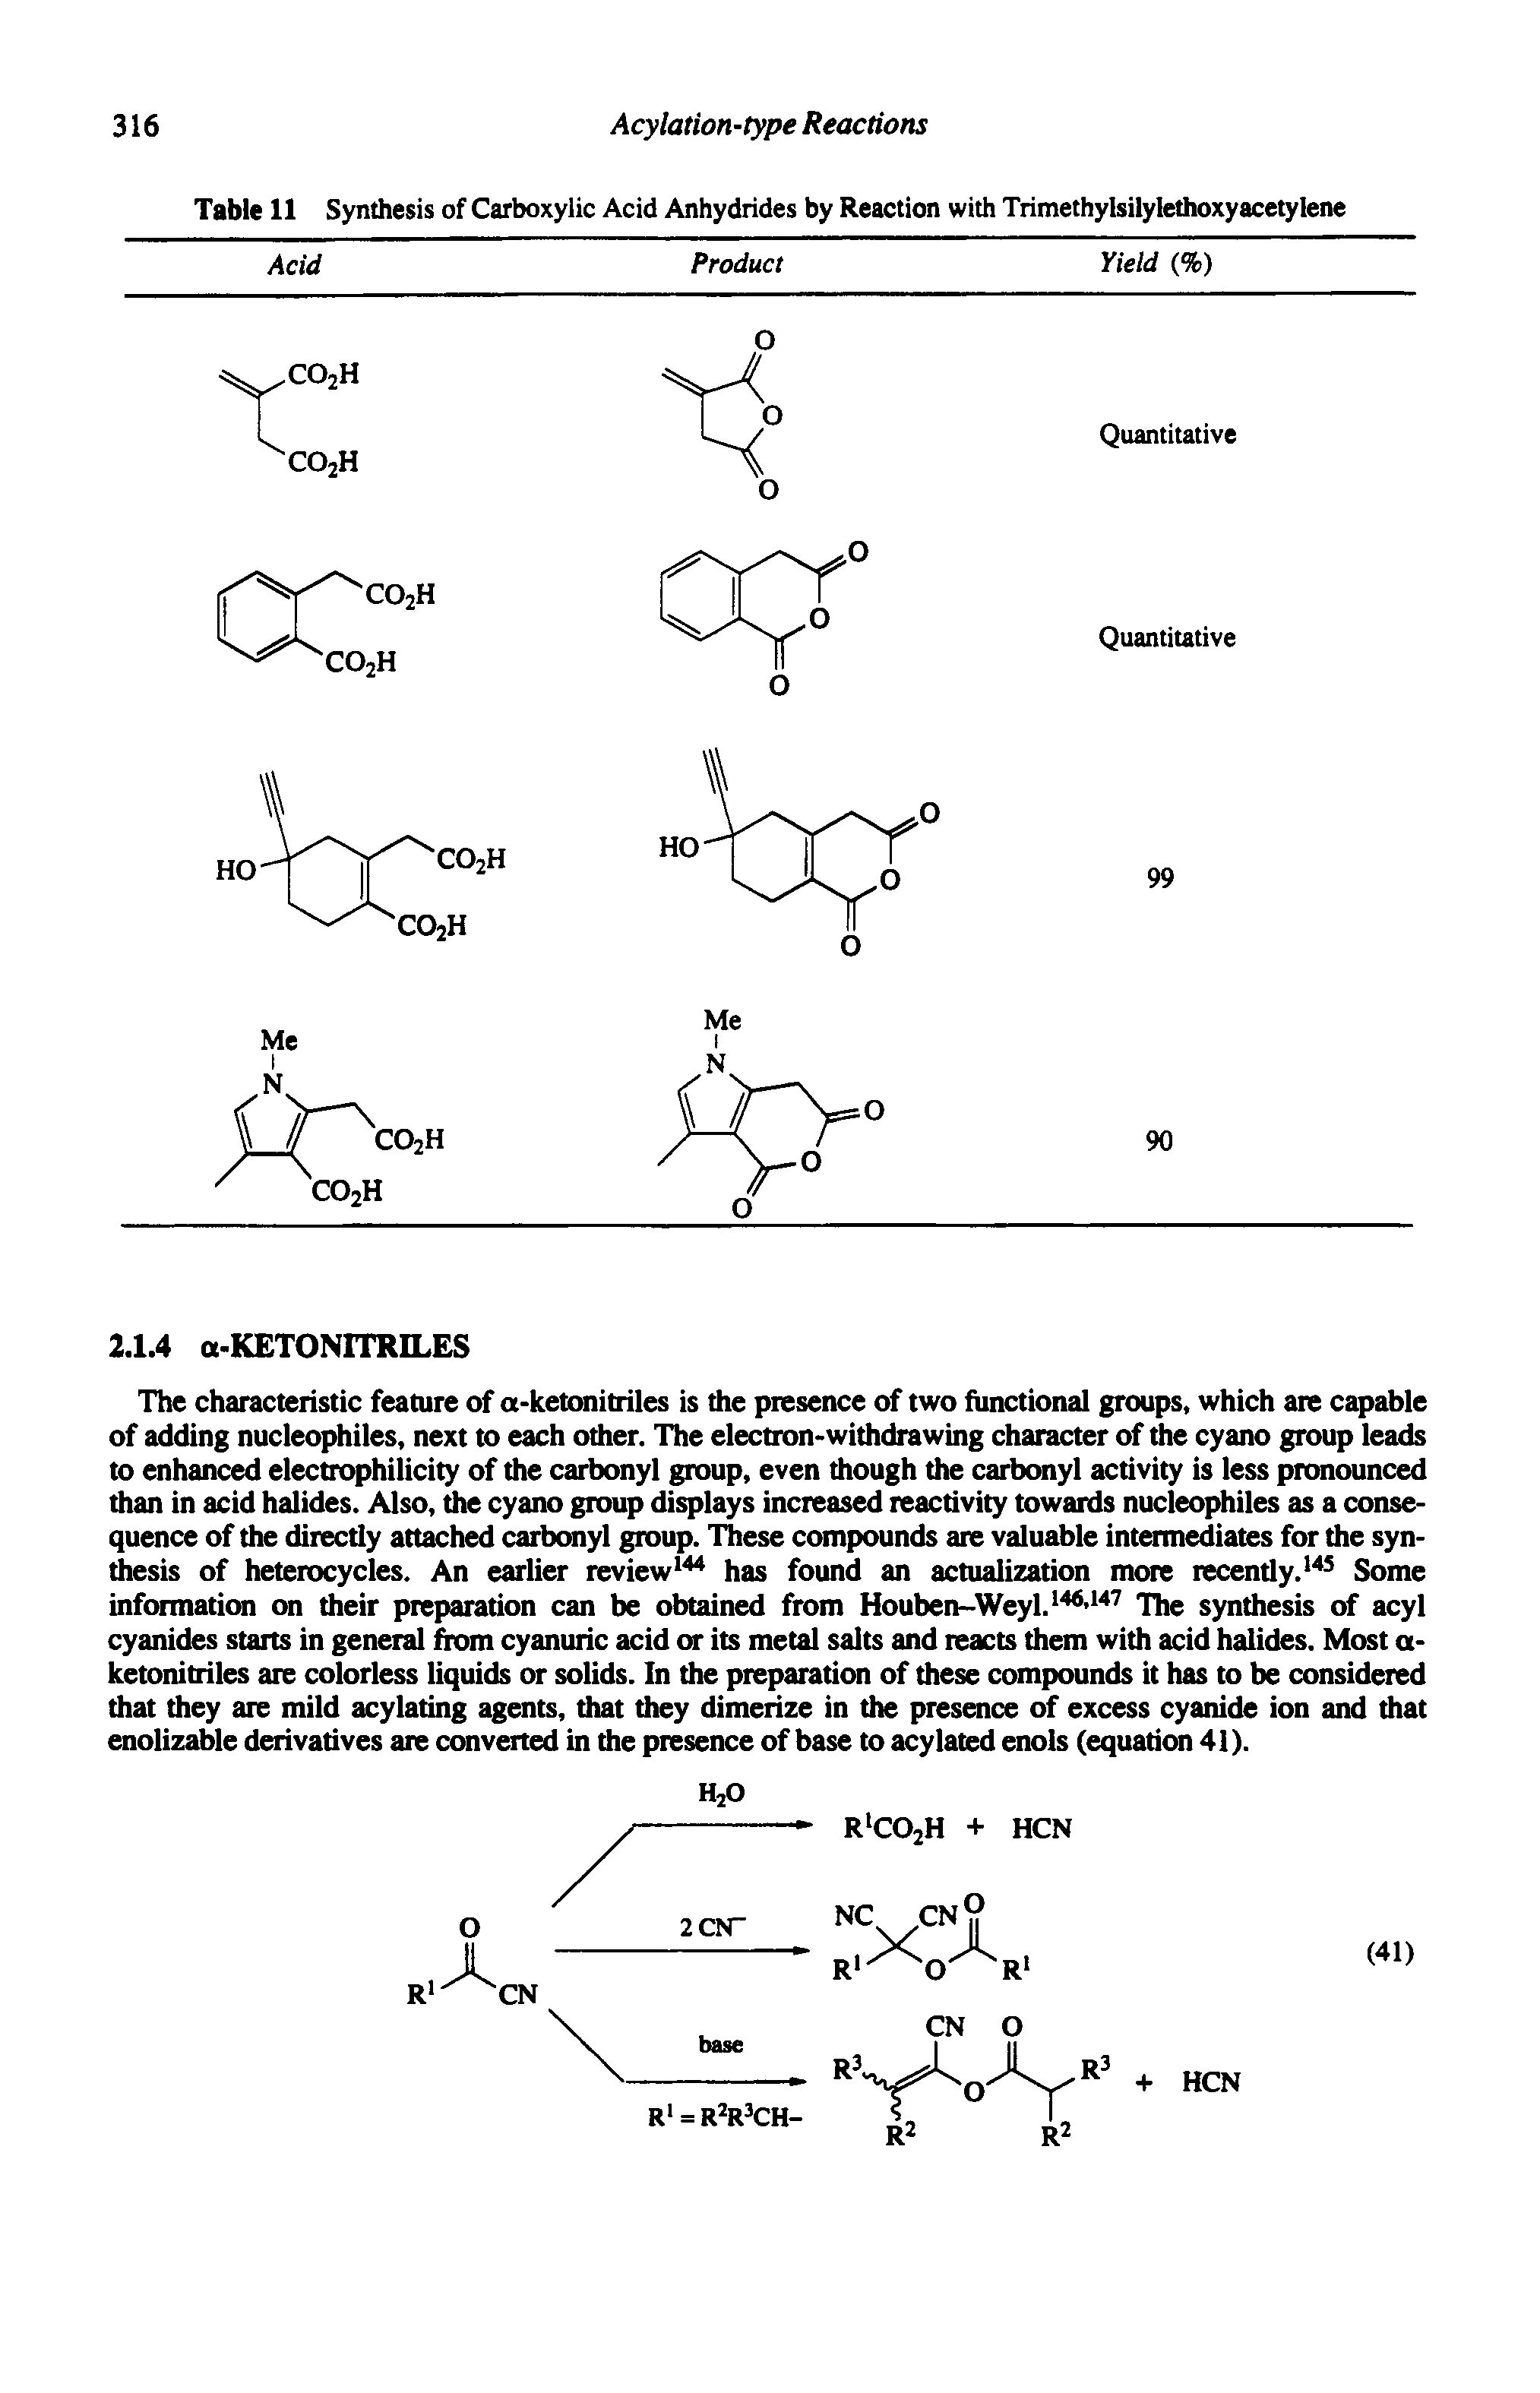 Table 11 Synthesis of Carboxylic Acid Anhydrides by Reaction with Trimethylsilylethoxyacetylene...